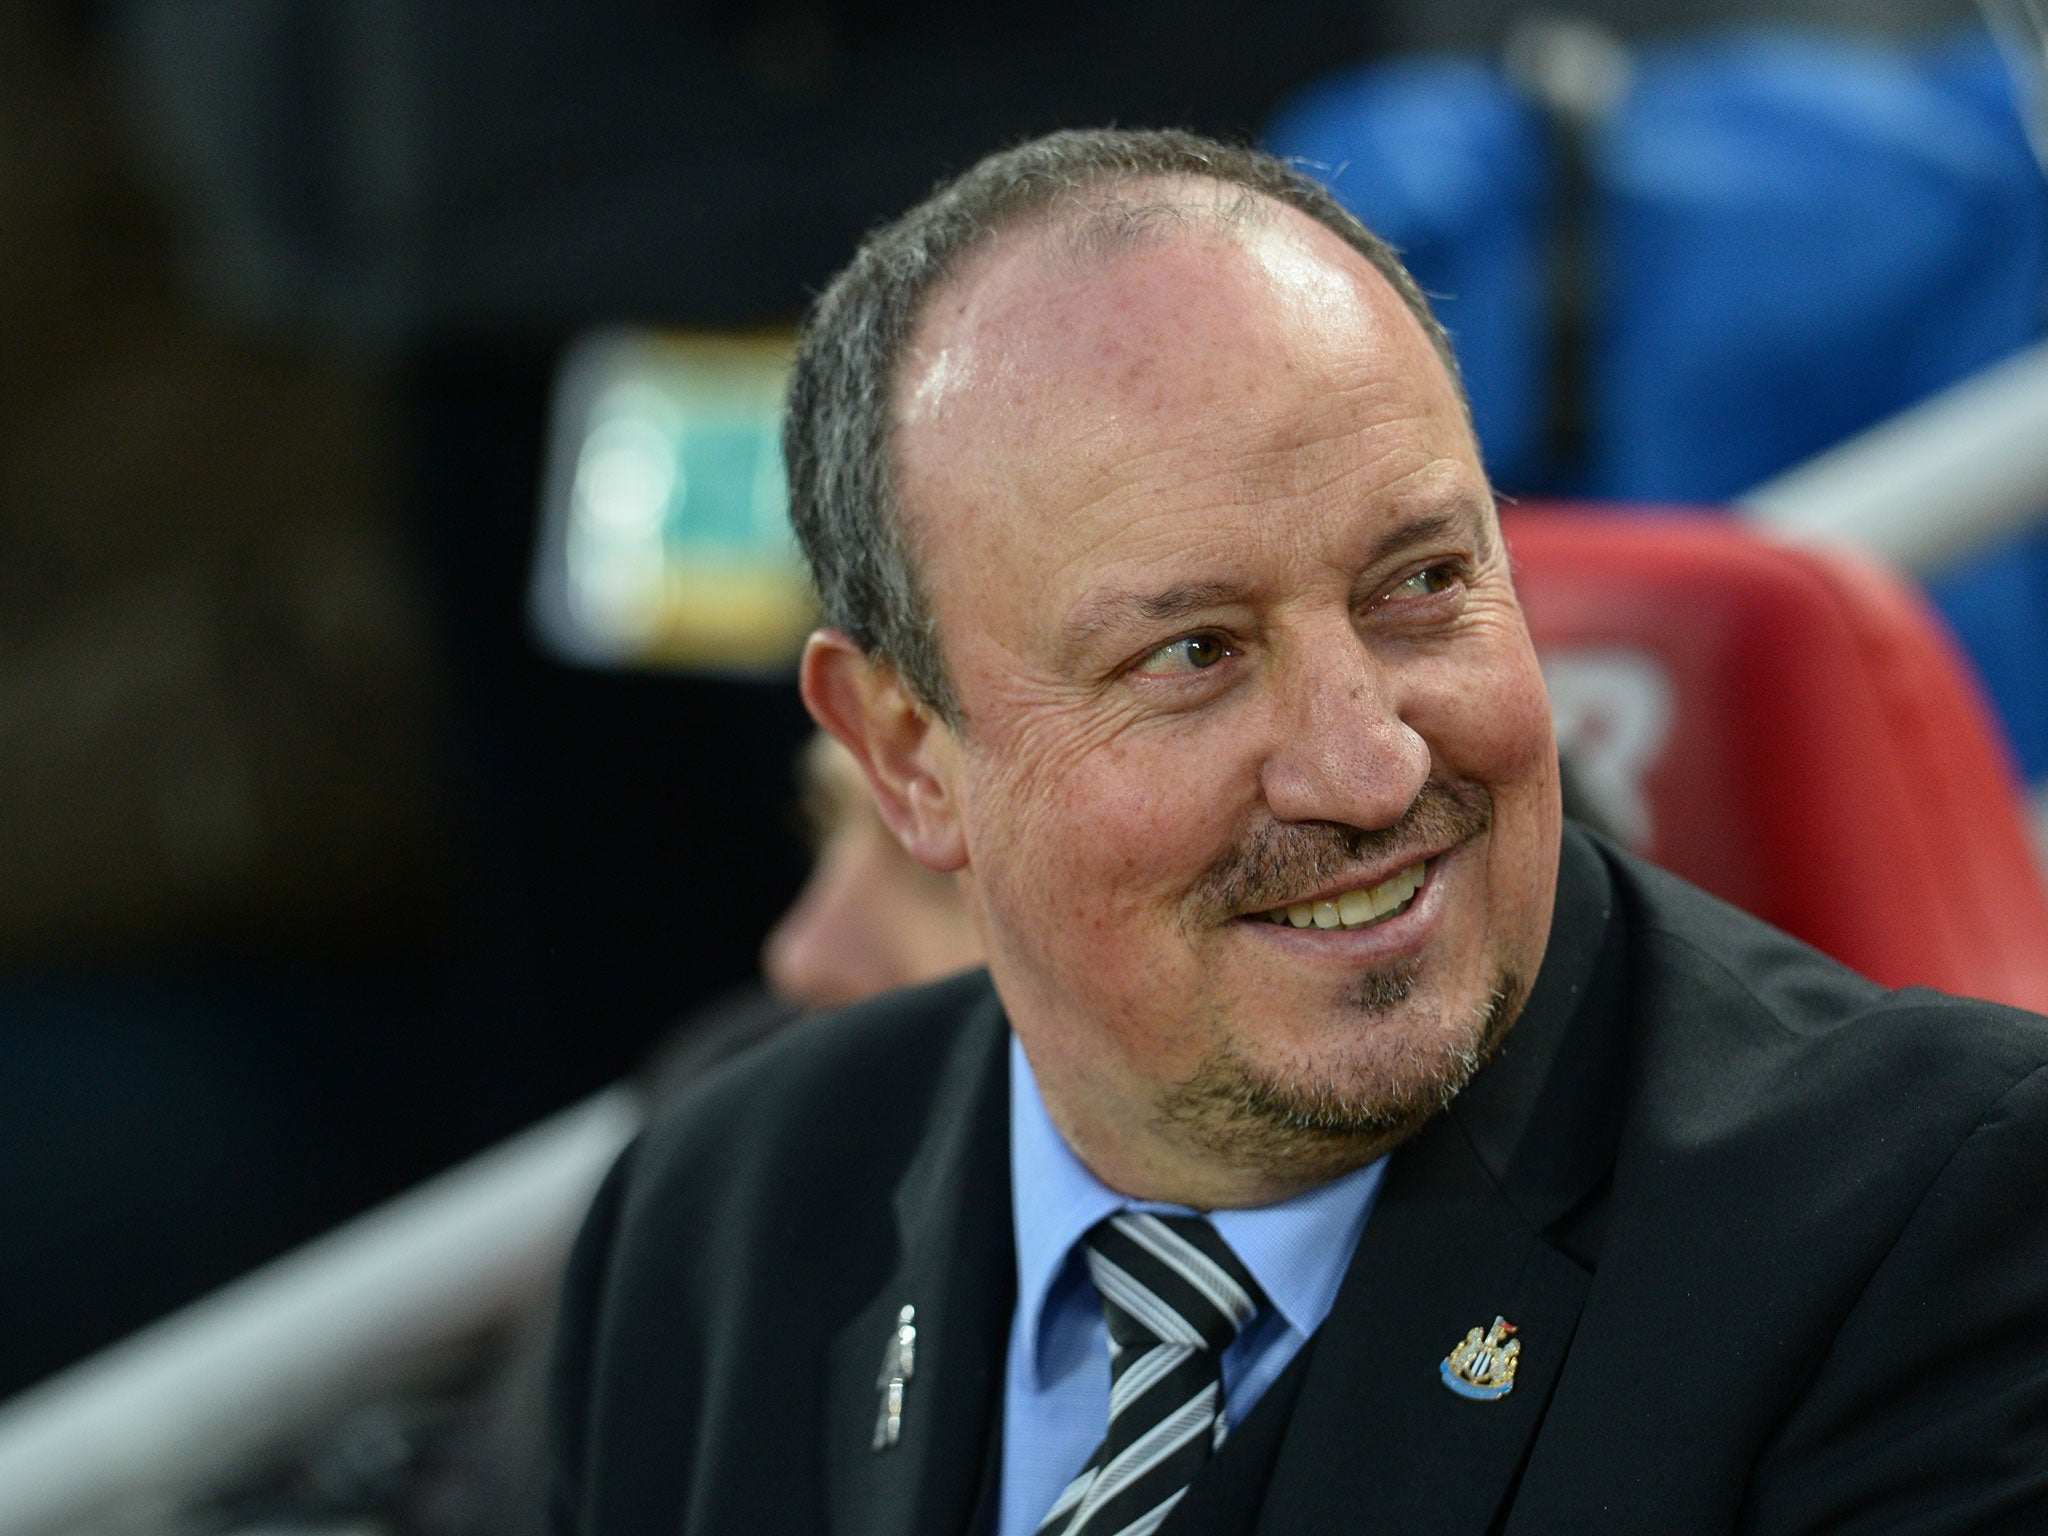 Benitez is in a positive mood